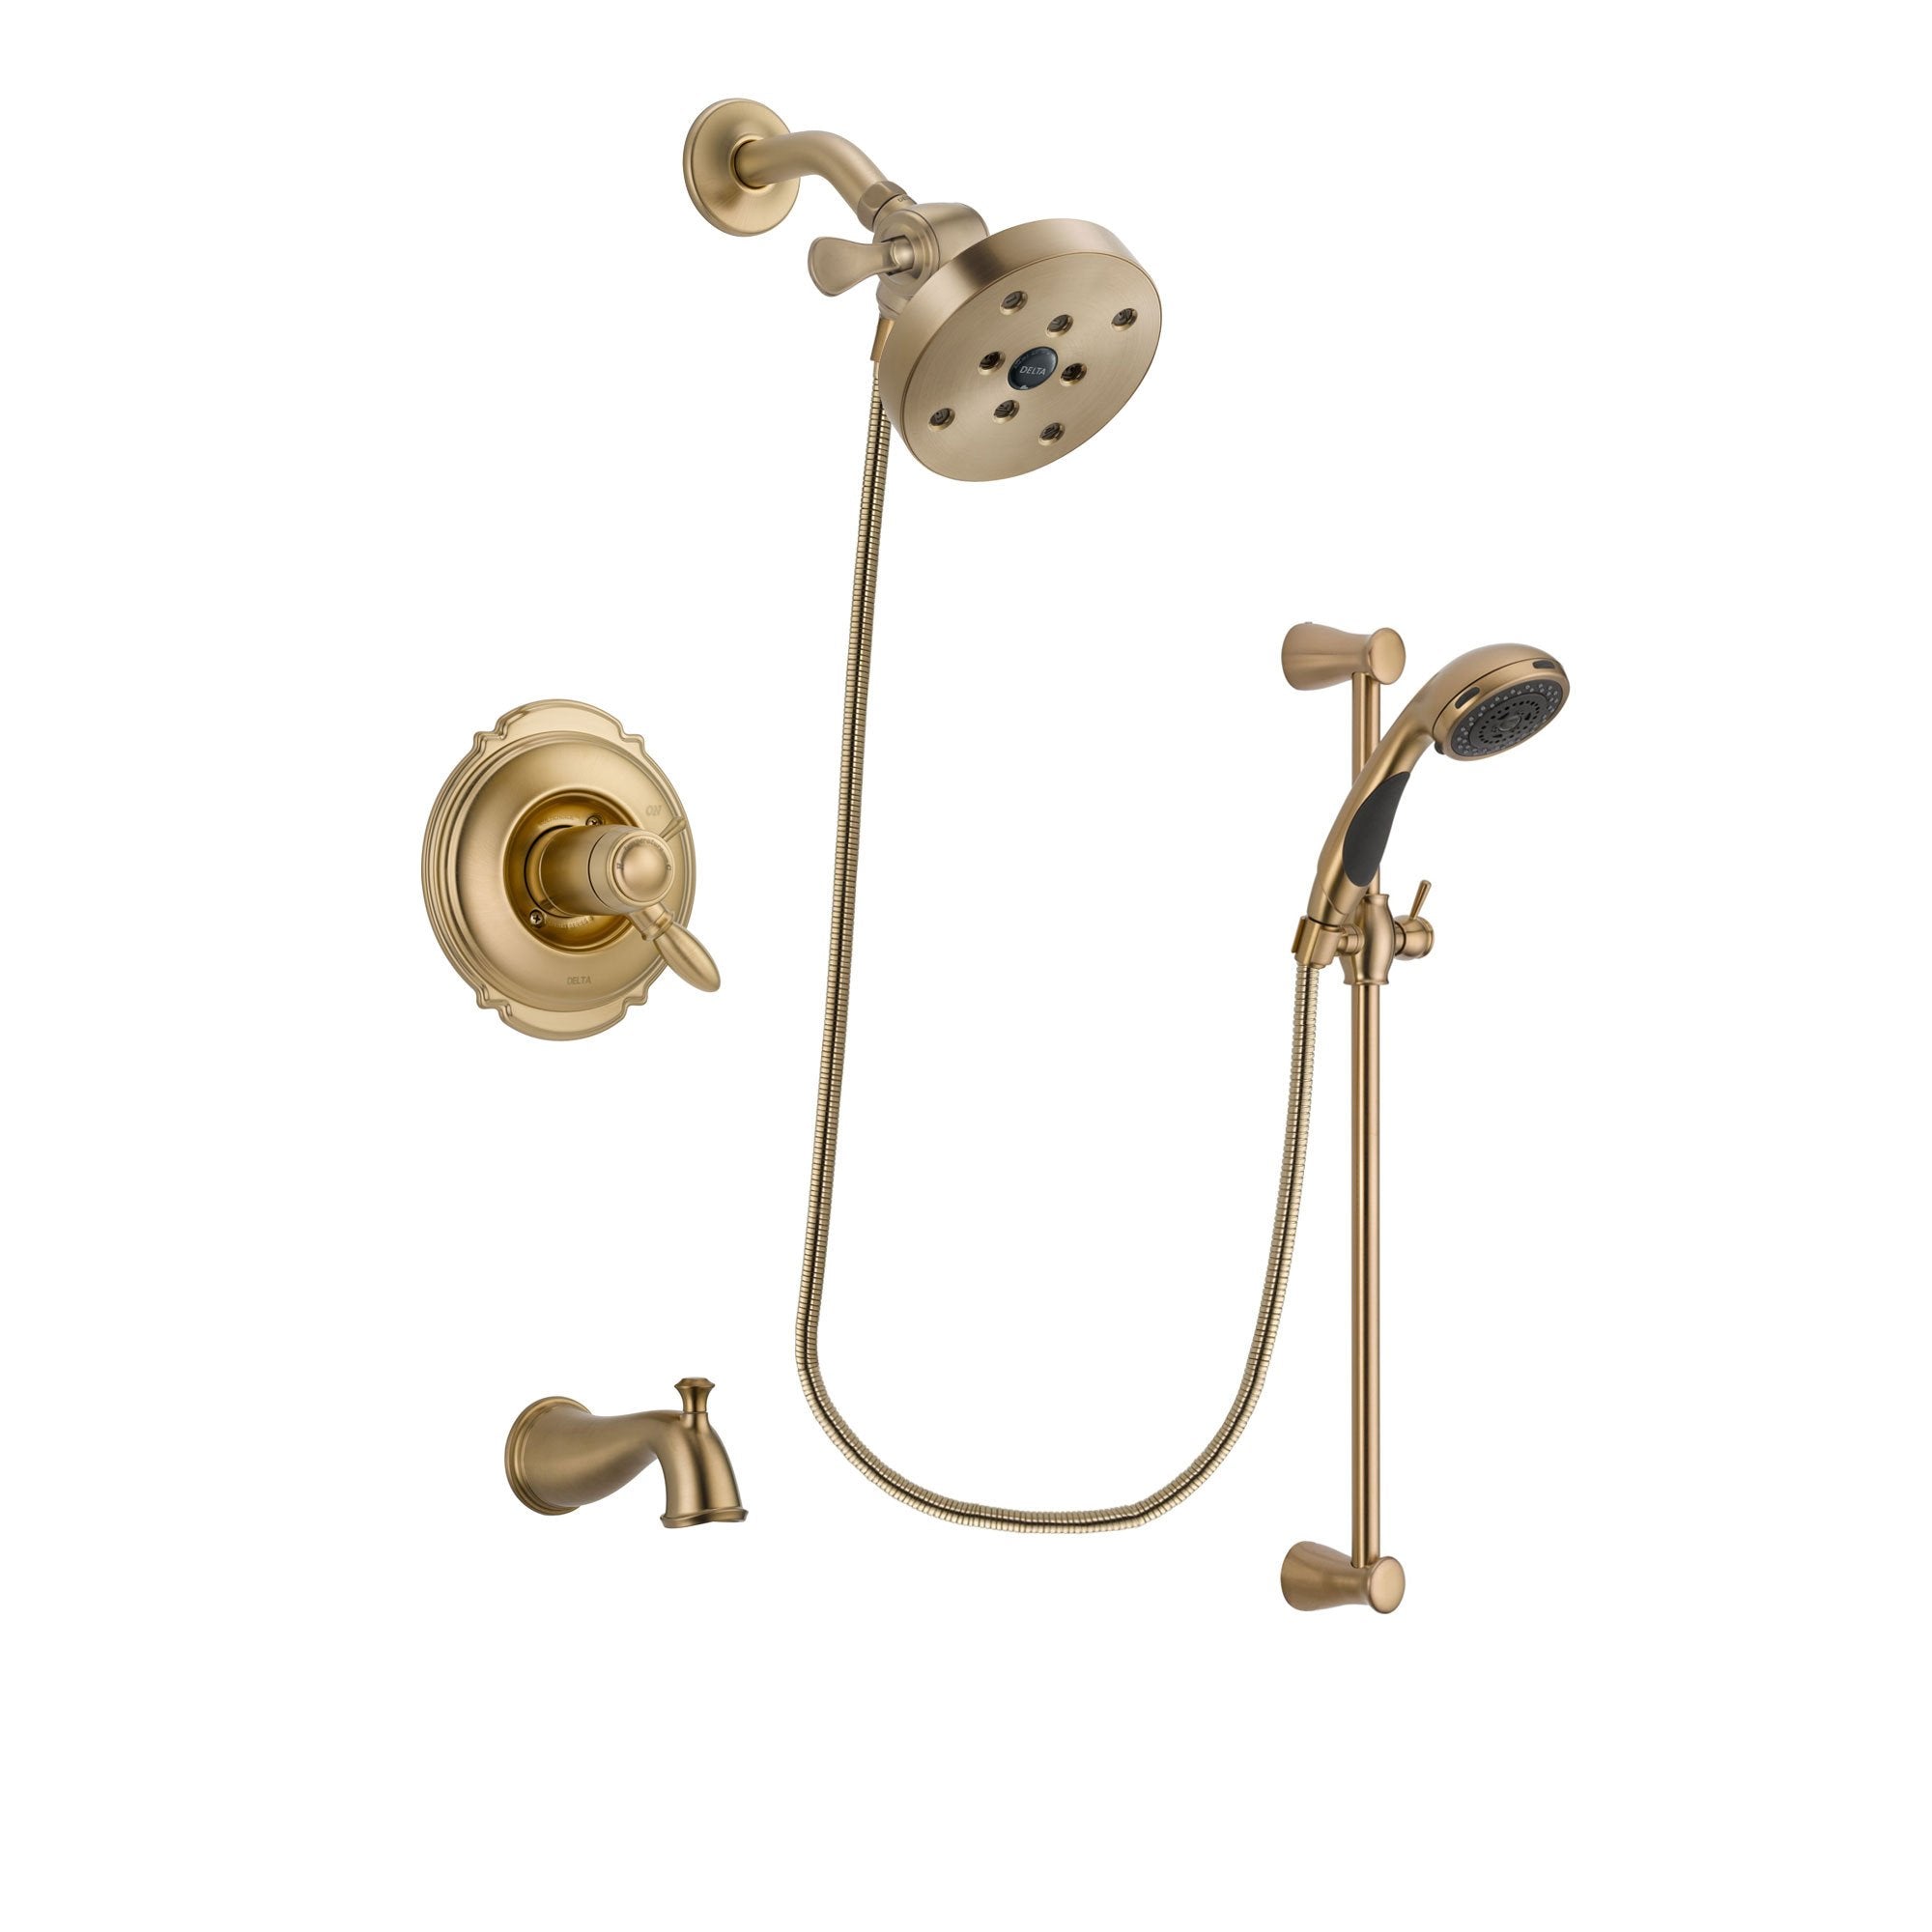 Delta Victorian Champagne Bronze Finish Thermostatic Tub and Shower Faucet System Package with 5-1/2 inch Showerhead and Personal Handheld Shower Sprayer with Slide Bar Includes Rough-in Valve and Tub Spout DSP3501V